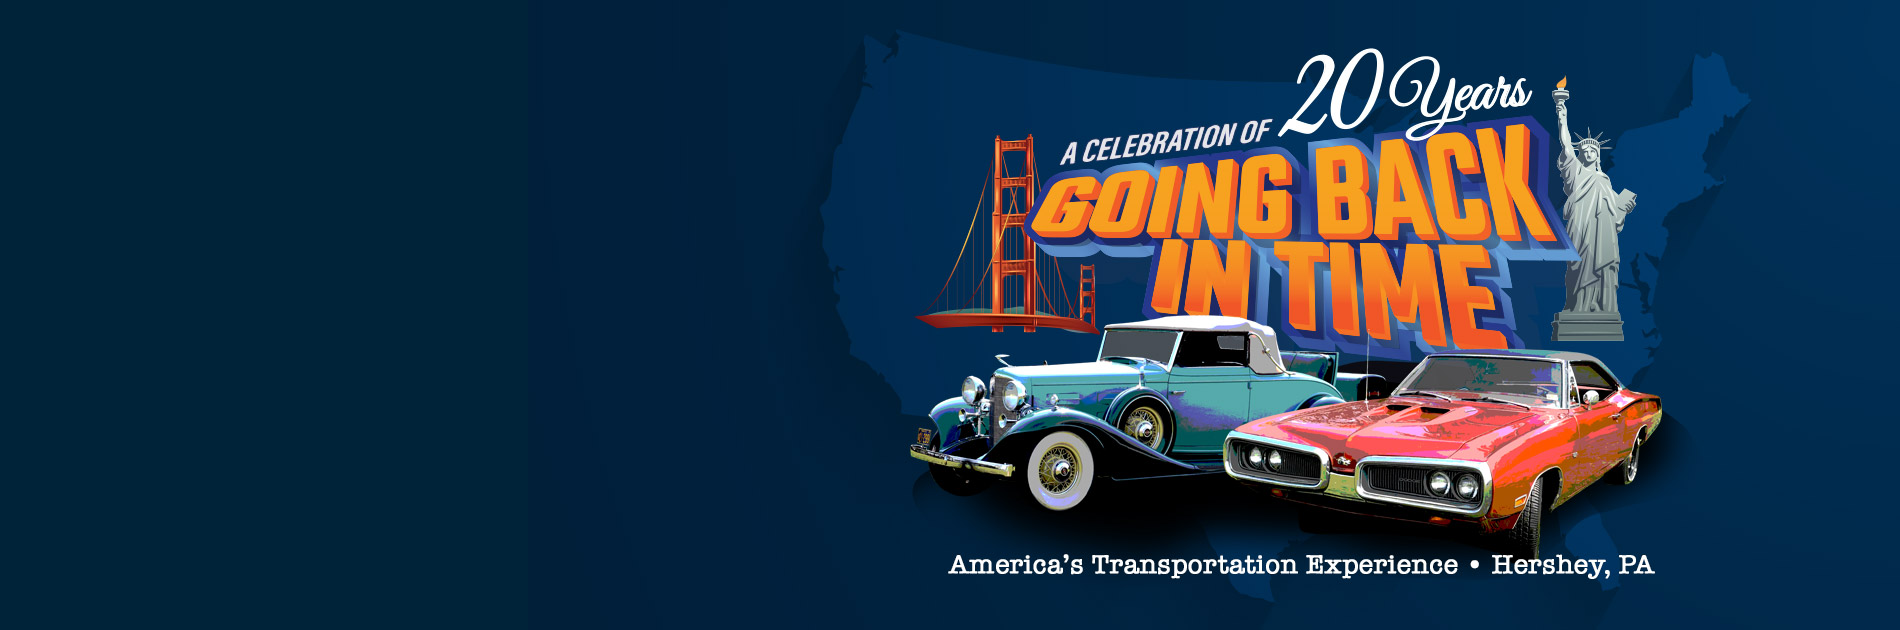 A Celebration of 20 Years! Going Back in Time at America's Transportation Experience- Hershey PA